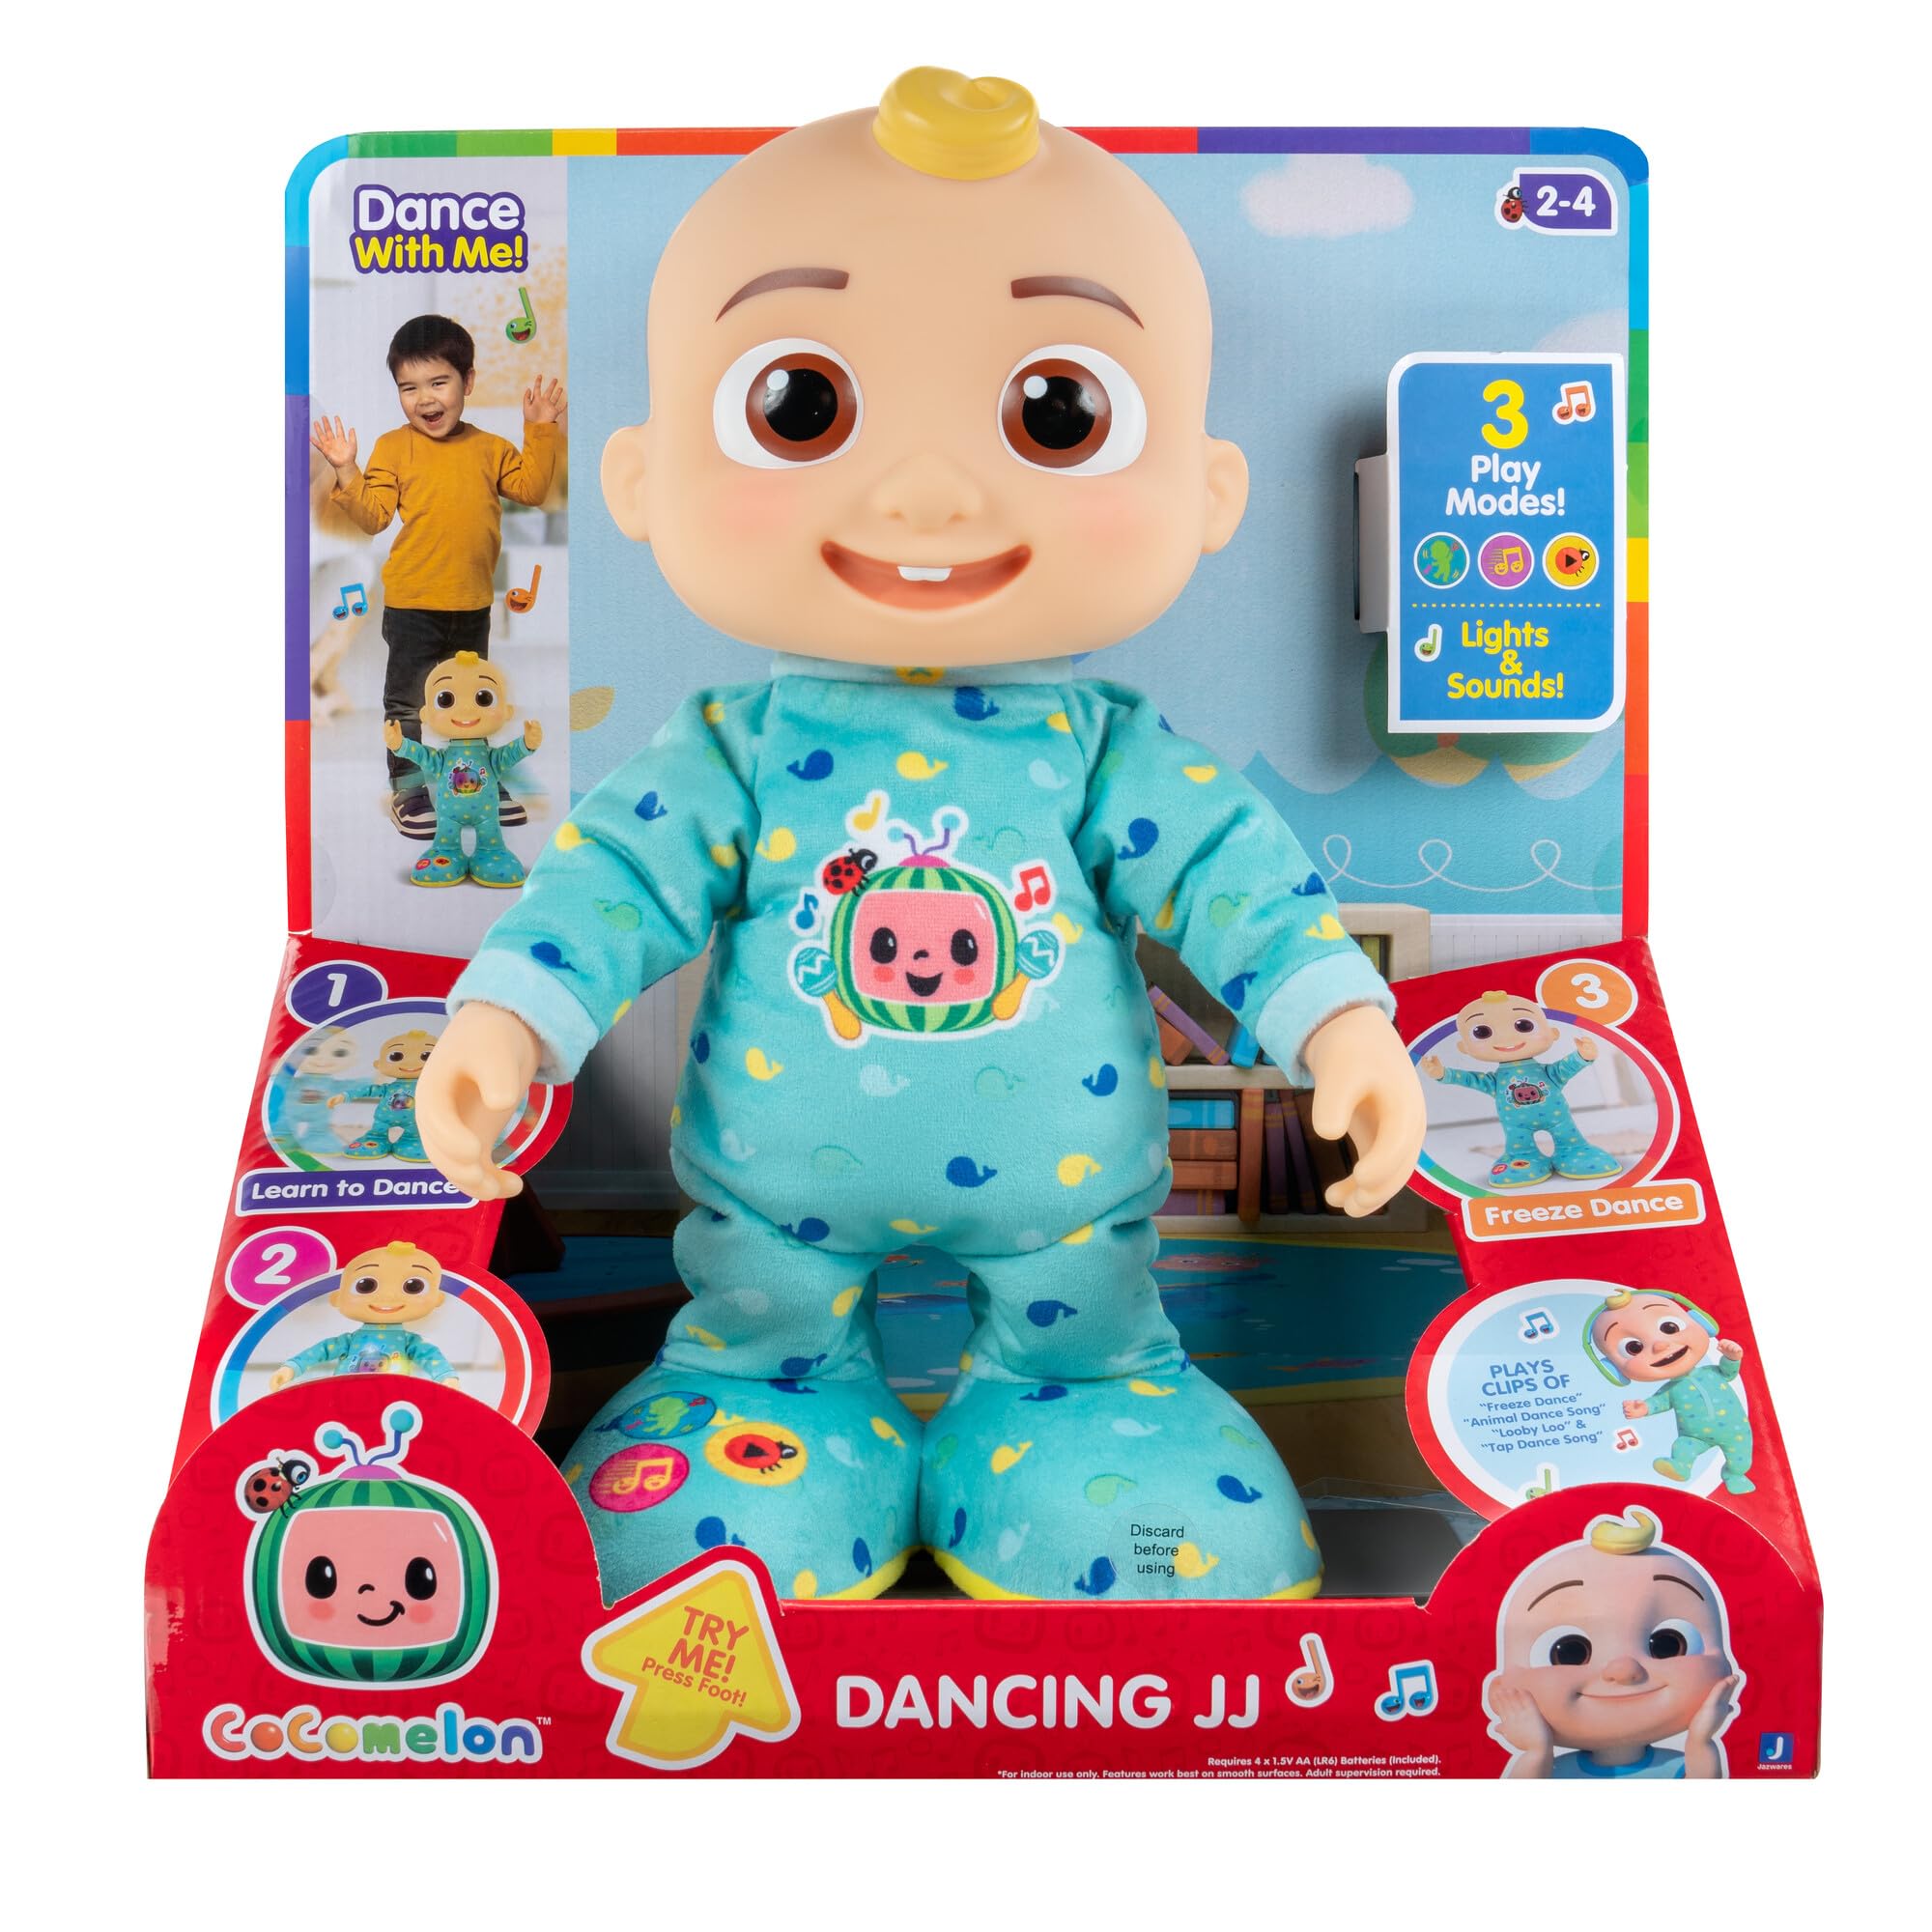 Cocomelon Dancing JJ Feature Doll - Learn to Dance with JJ - Lights, Sounds, Songs, Freeze Dance, and More - Move and Groove with 14” JJ - Toys for Babies, Toddlers, and Preschoolers